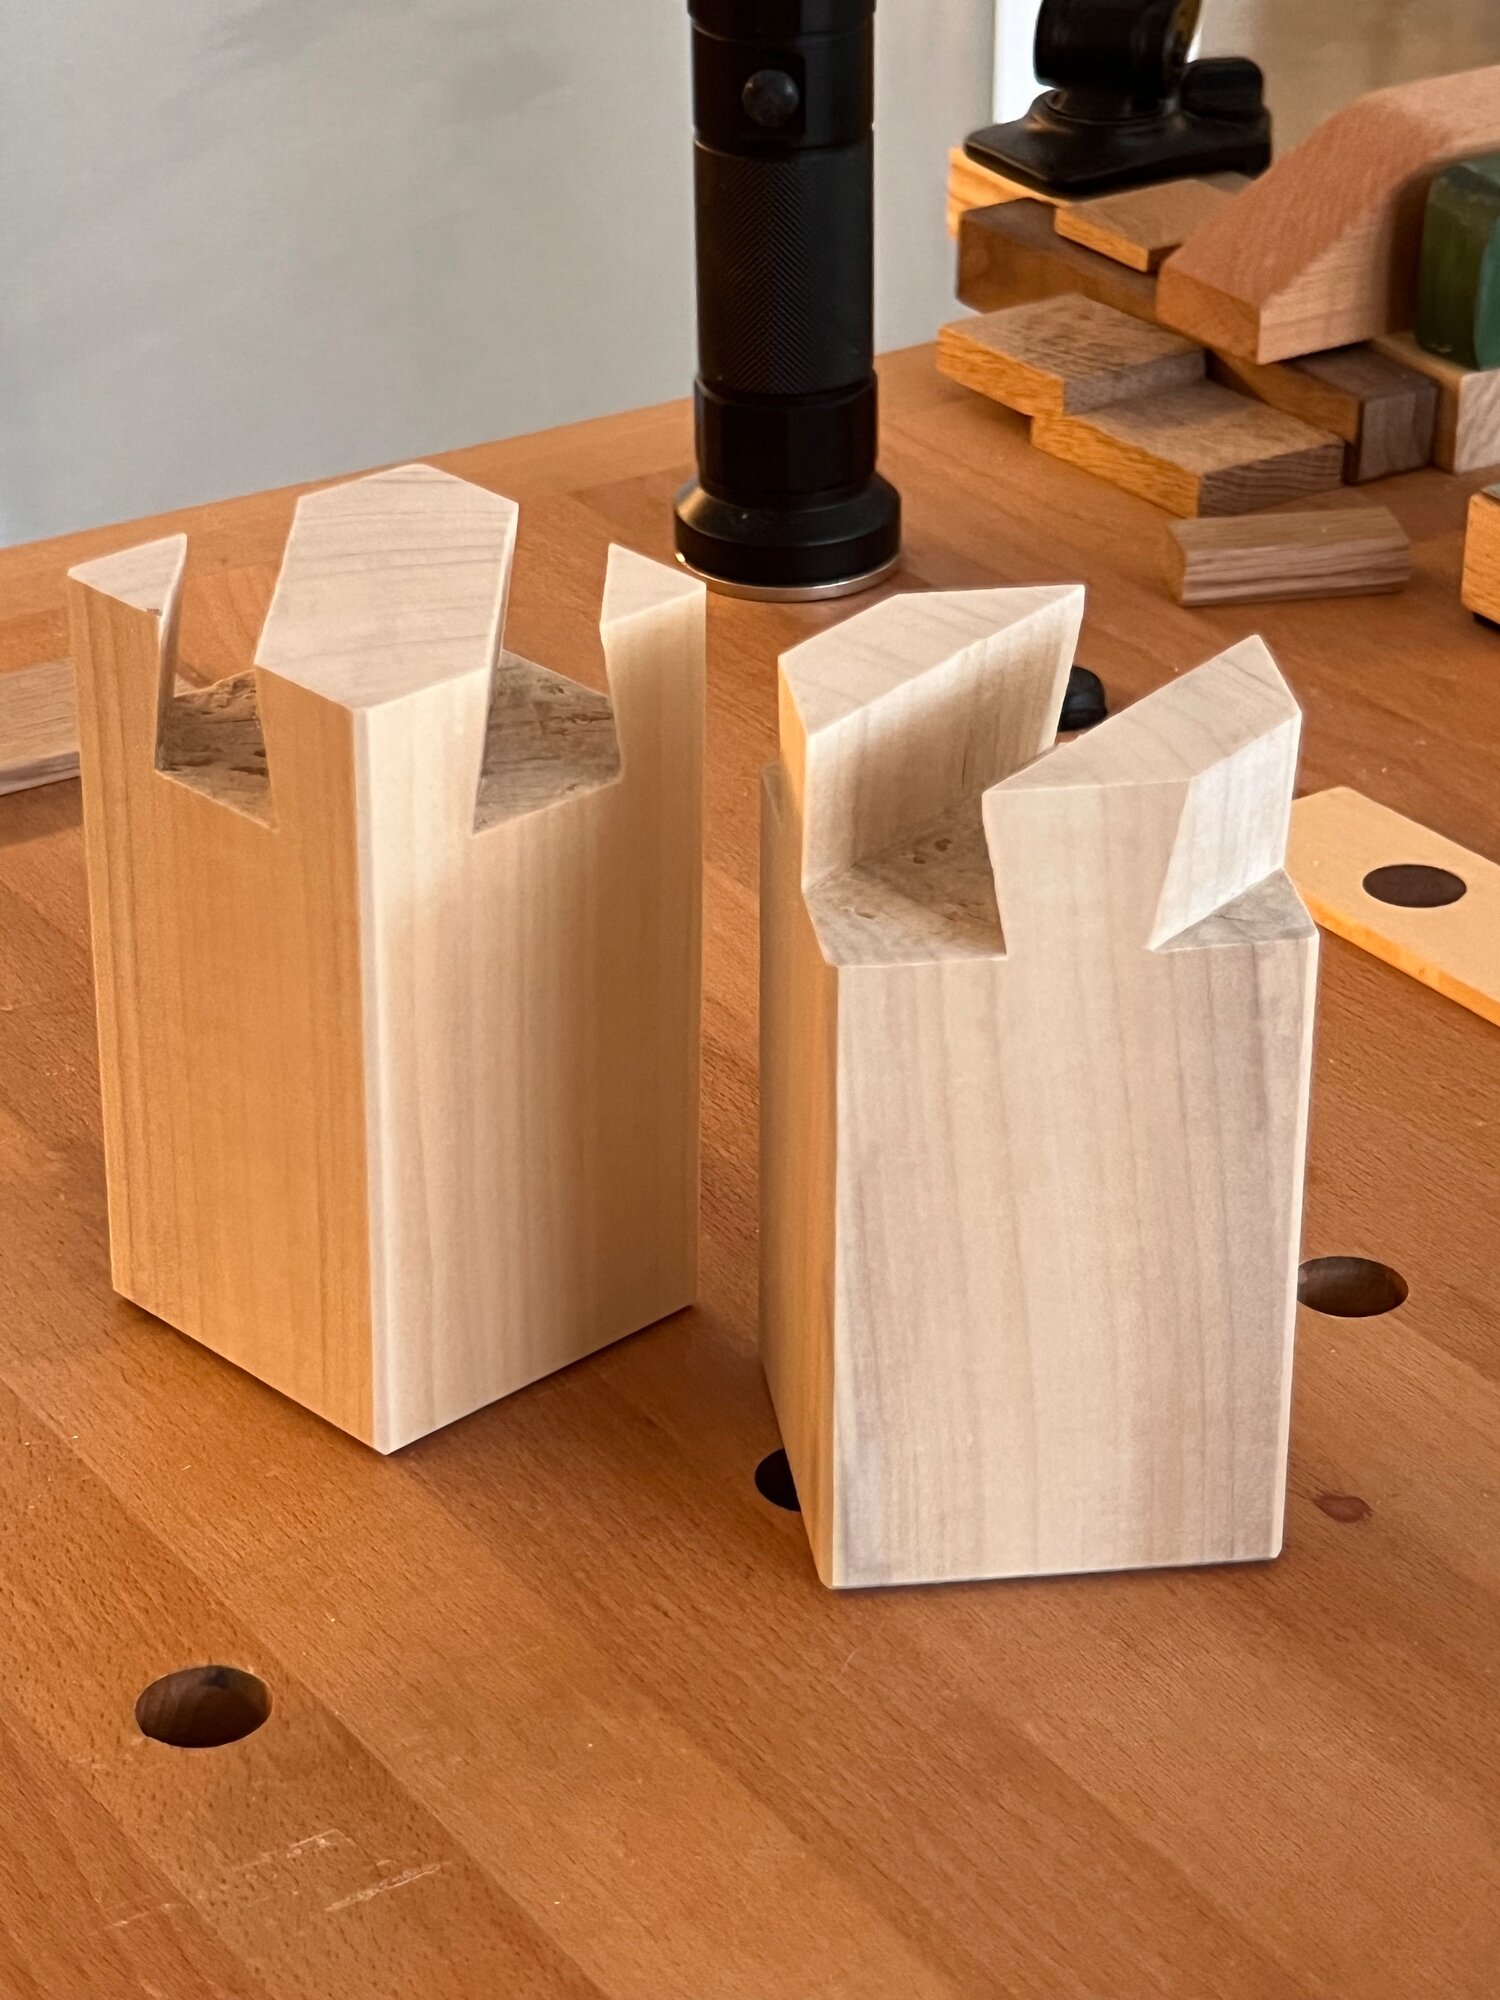 Four-way dovetail joint